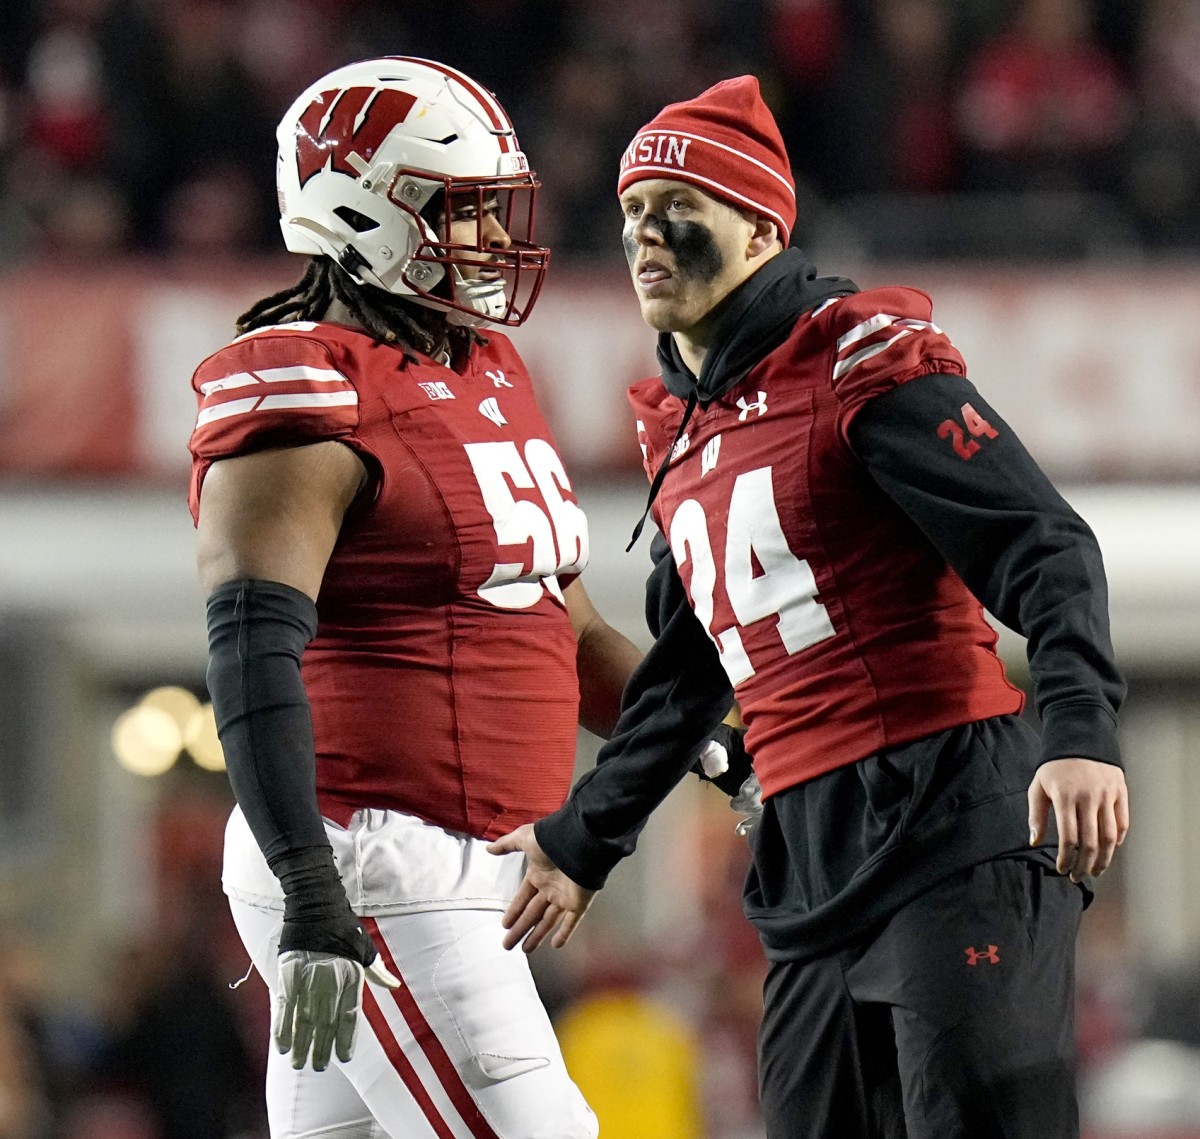 Injured Wisconsin safety Hunter Wohler (24) encourages his teammates during the fourth quarter of their game Saturday, November 18, 2023 at Camp Randall Stadium in Madison, Wisconsin. Wisconsin beat Nebraska 24-17 in overtime.